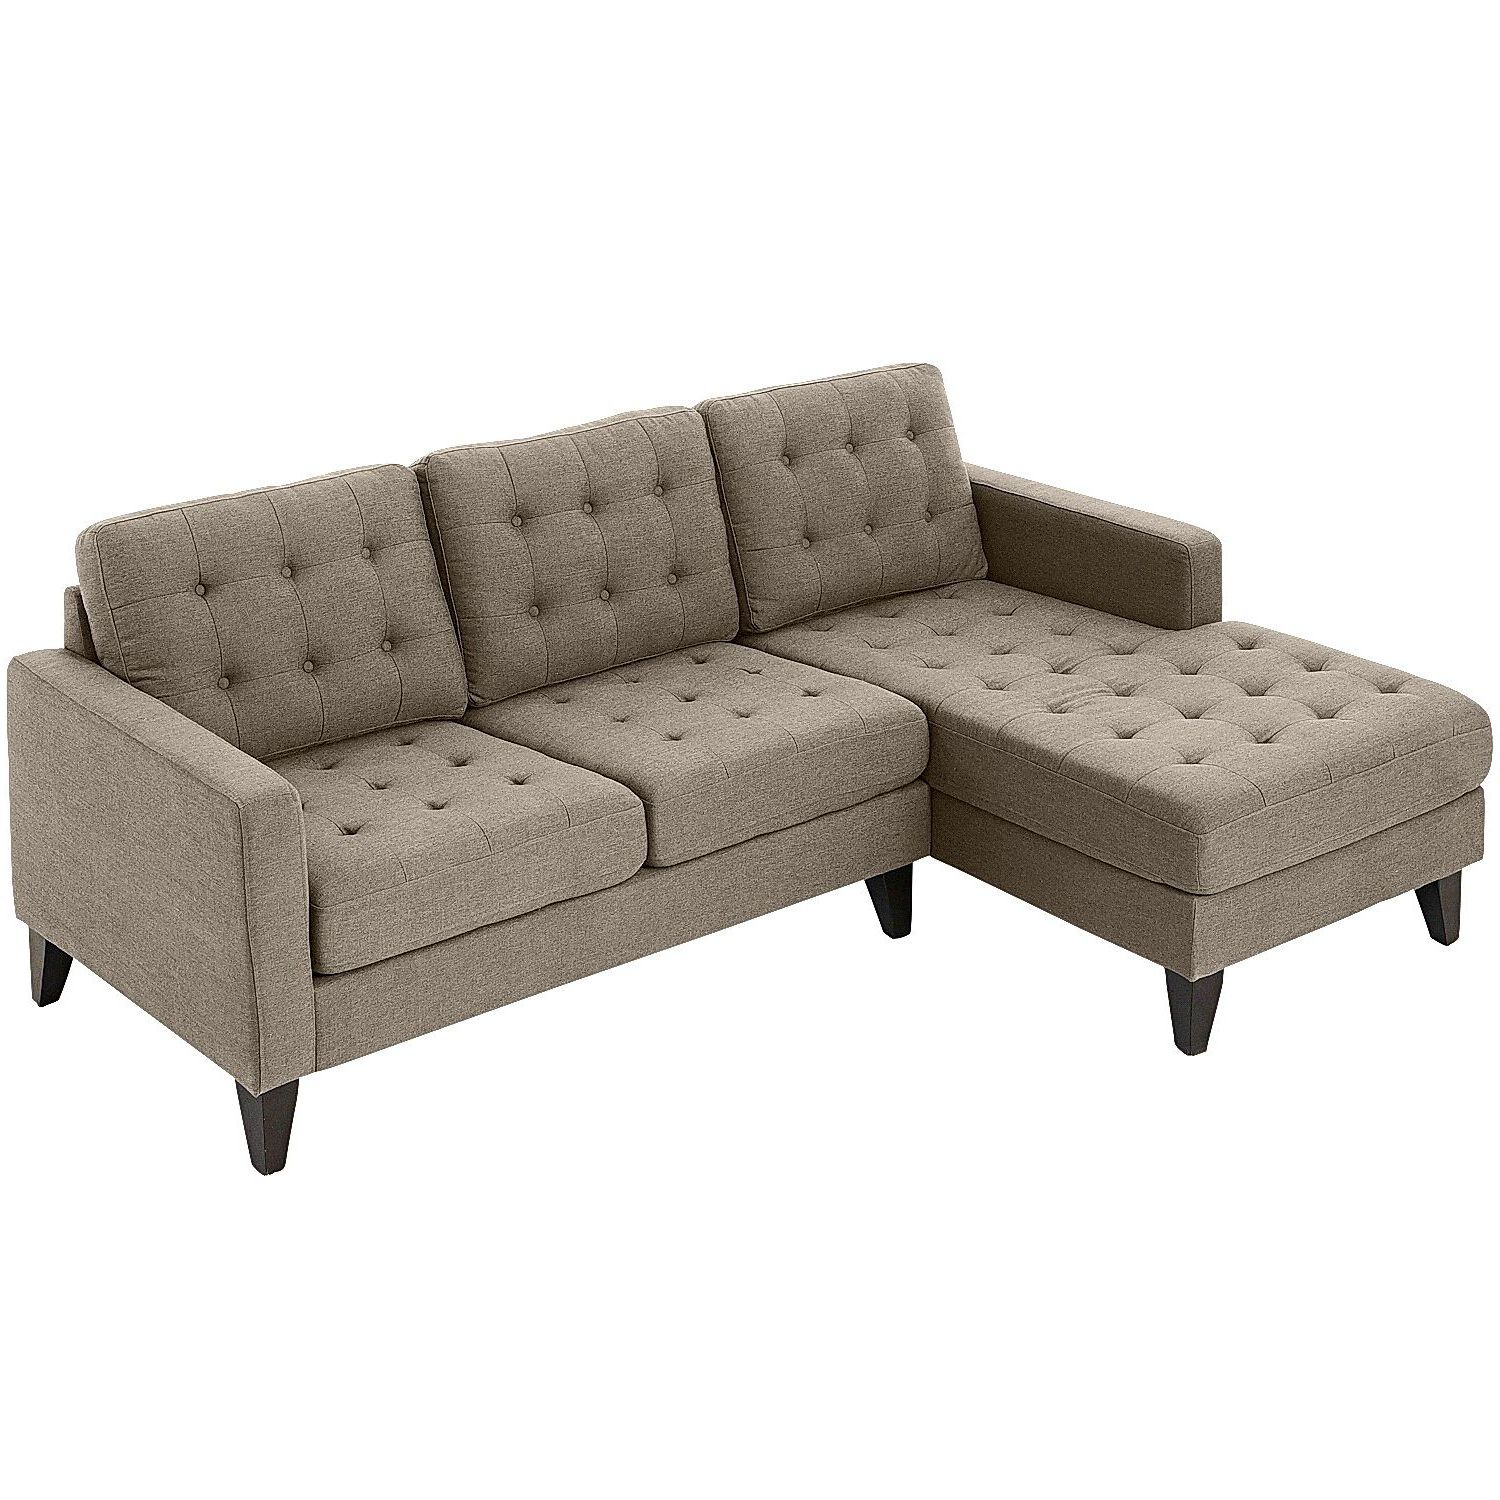 Element Right Side Chaise Sectional Sofas In Dark Gray Linen And Walnut Legs With Most Popular Nyle Putty 2 Piece Left Arm Chaise Sectional (View 9 of 25)